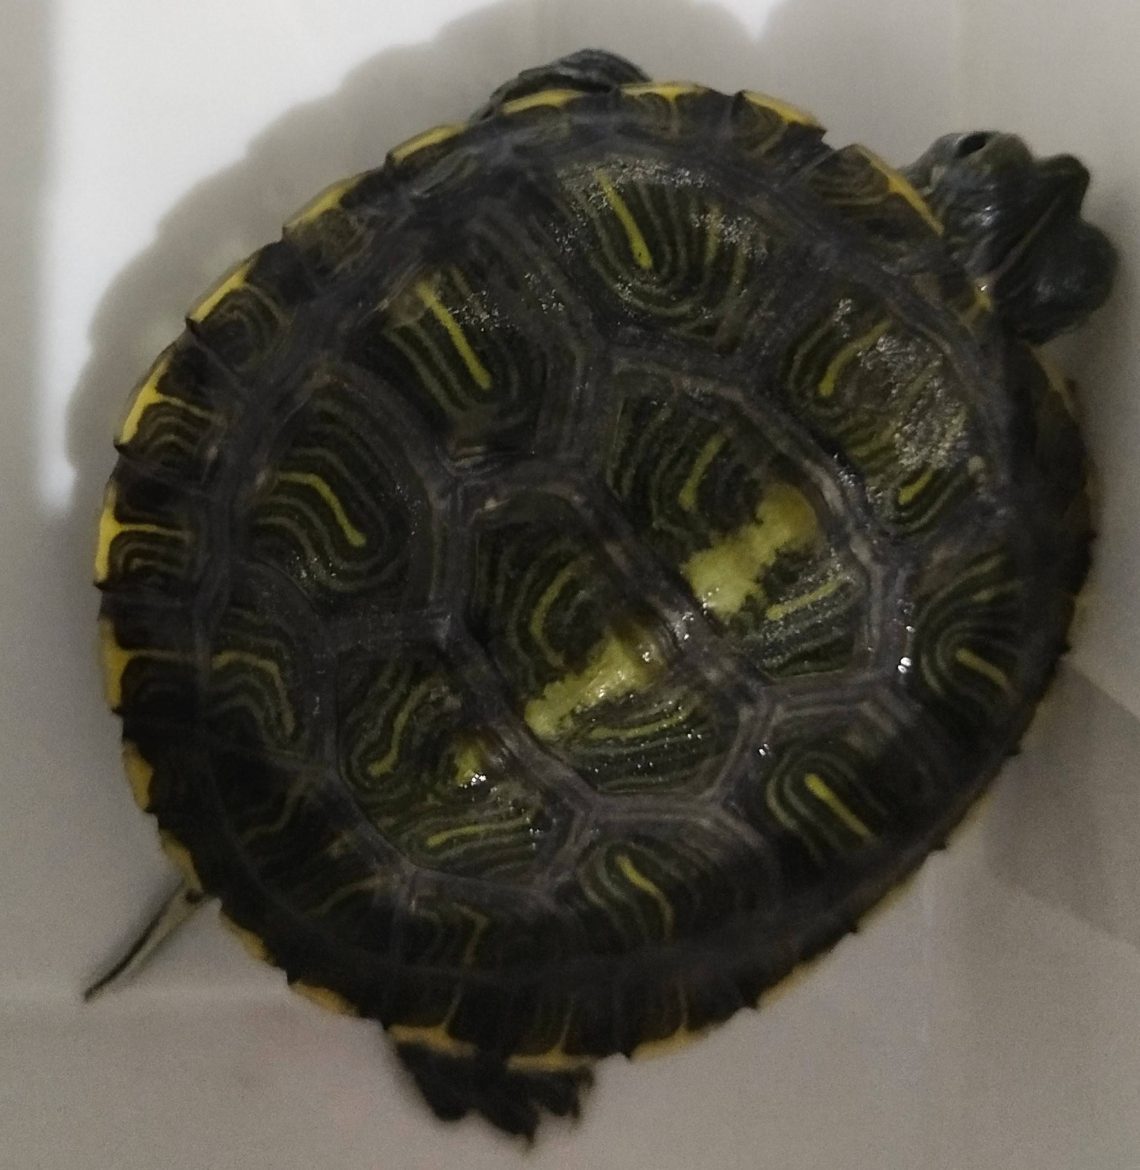 Why did the shell of the red-eared turtle turn dark or green?